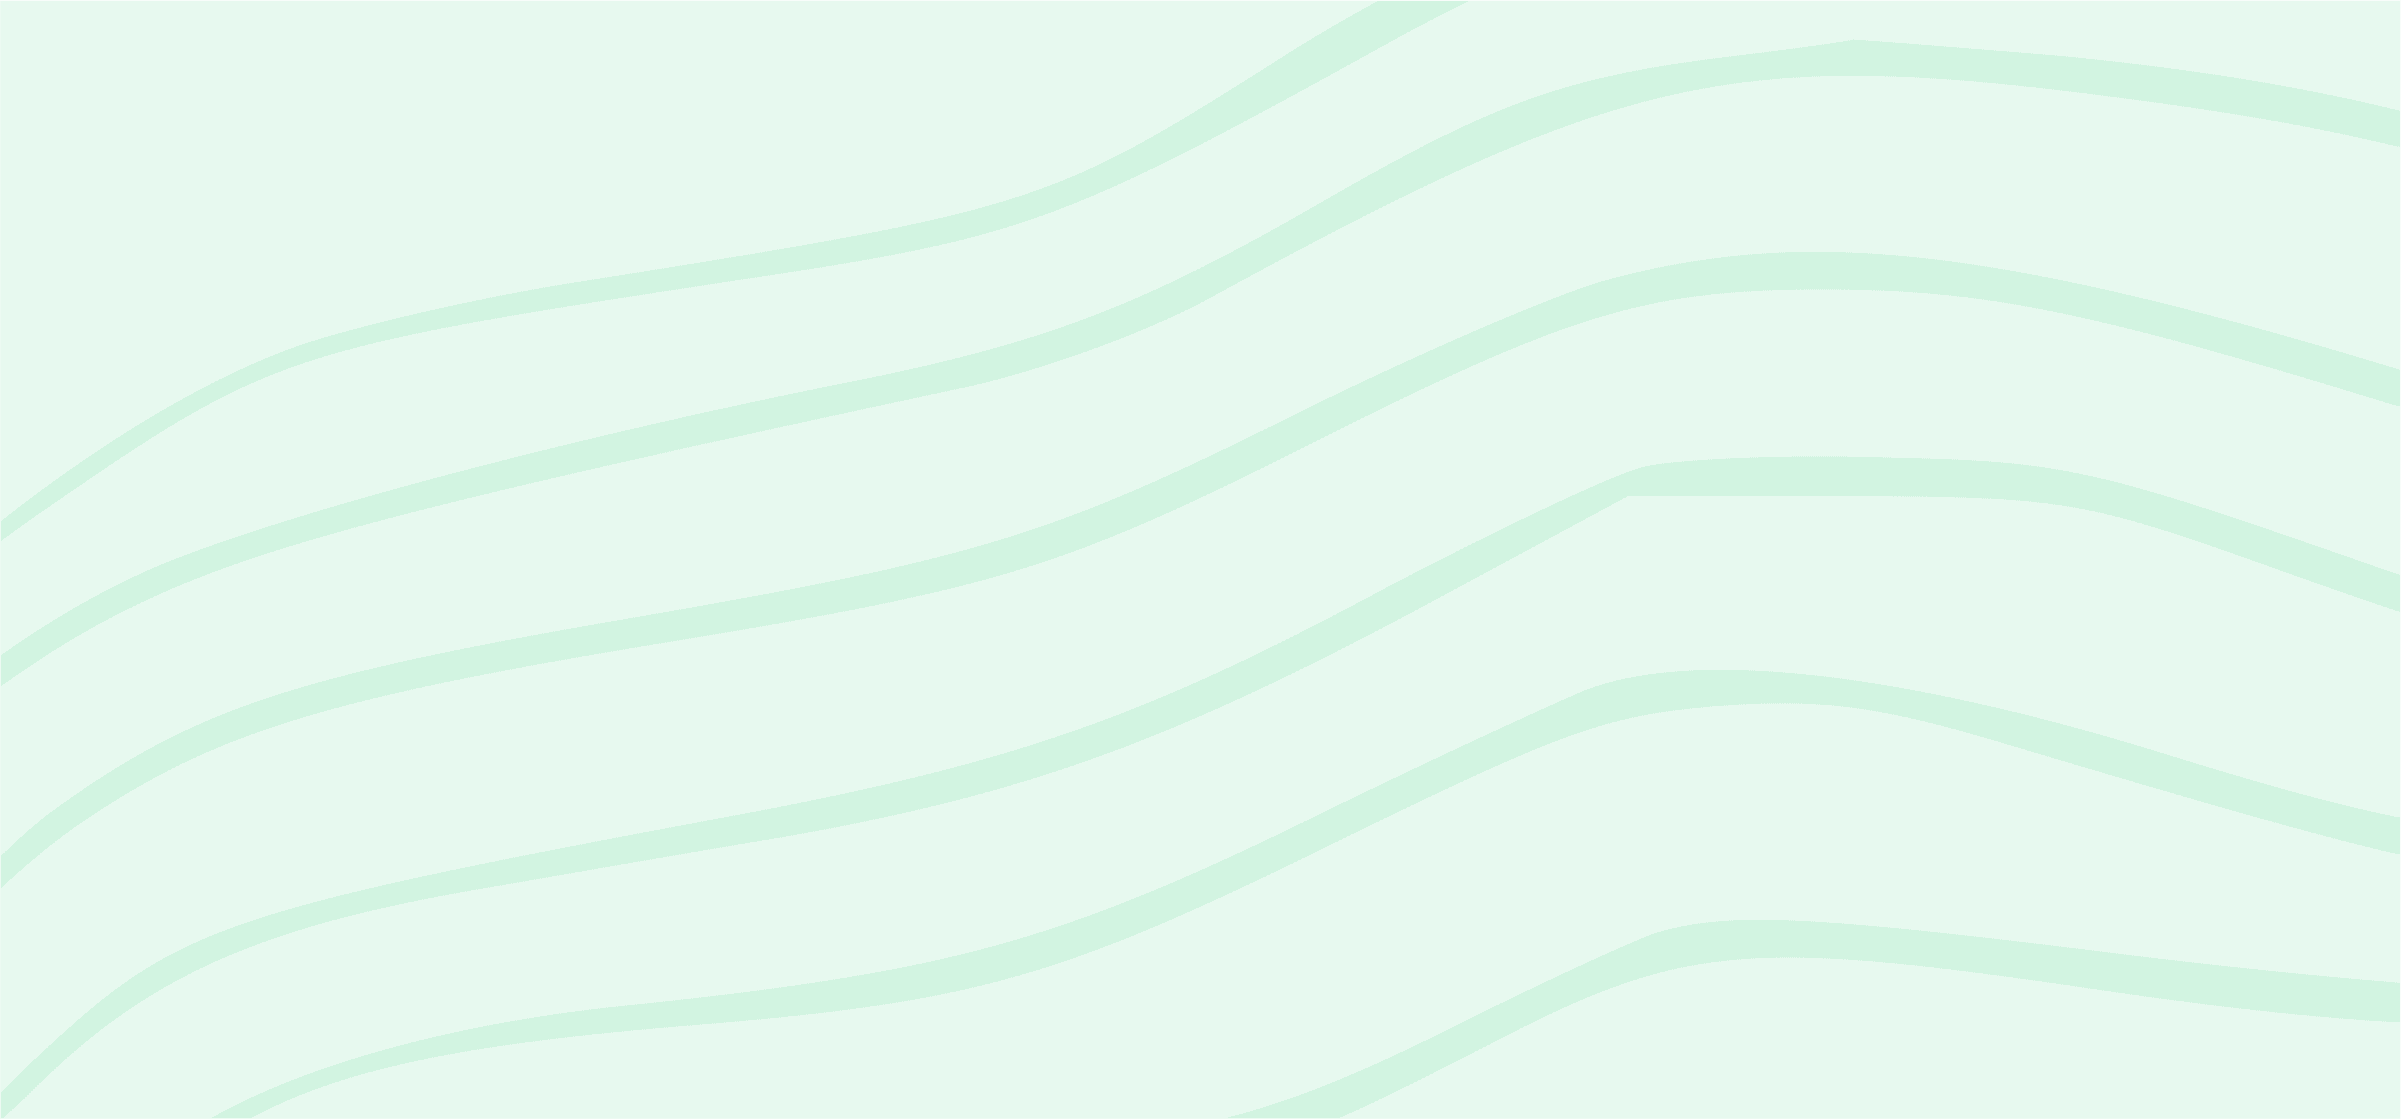 An illustration of smooth, wavy lines on a Unito green background.